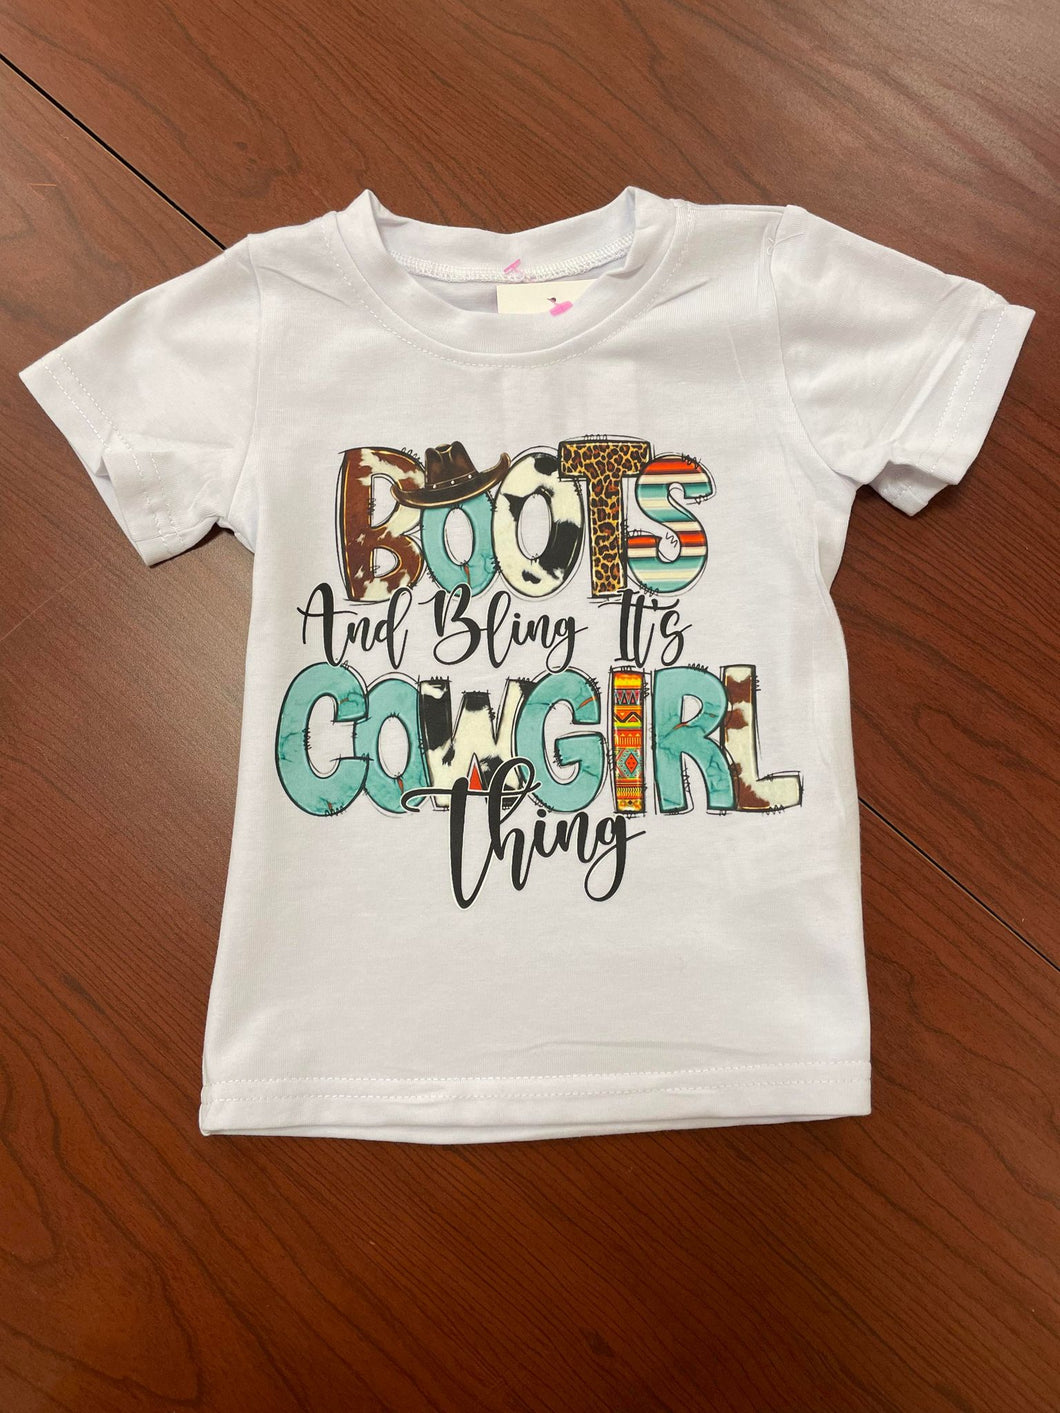 Boots, bling, it's cowgirl things T-shirts